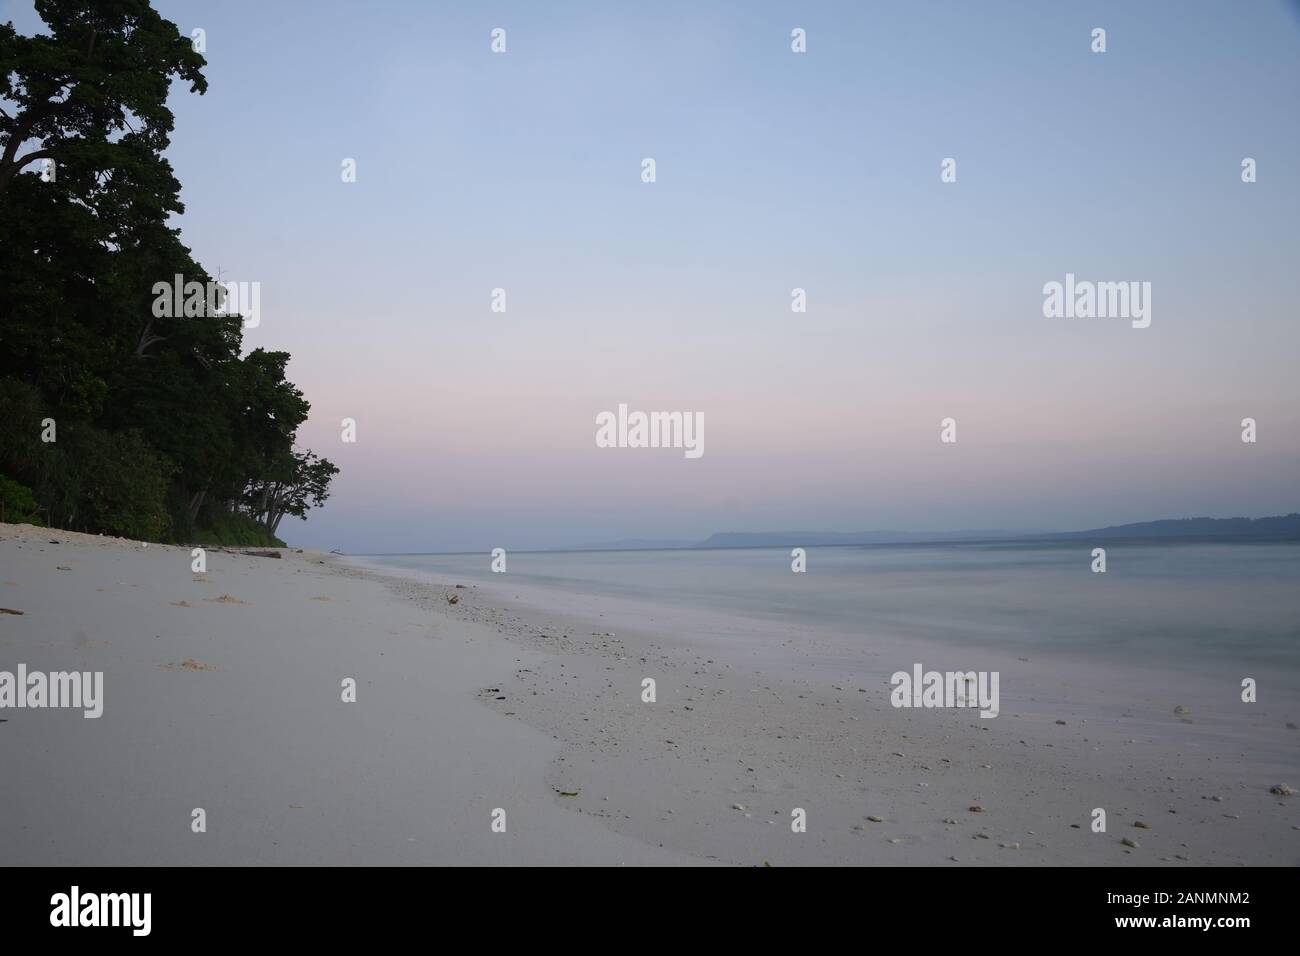 A beautiful landscape view before sunrise from a beach shore of Neil Island of andaman and nicobar islands India Stock Photo